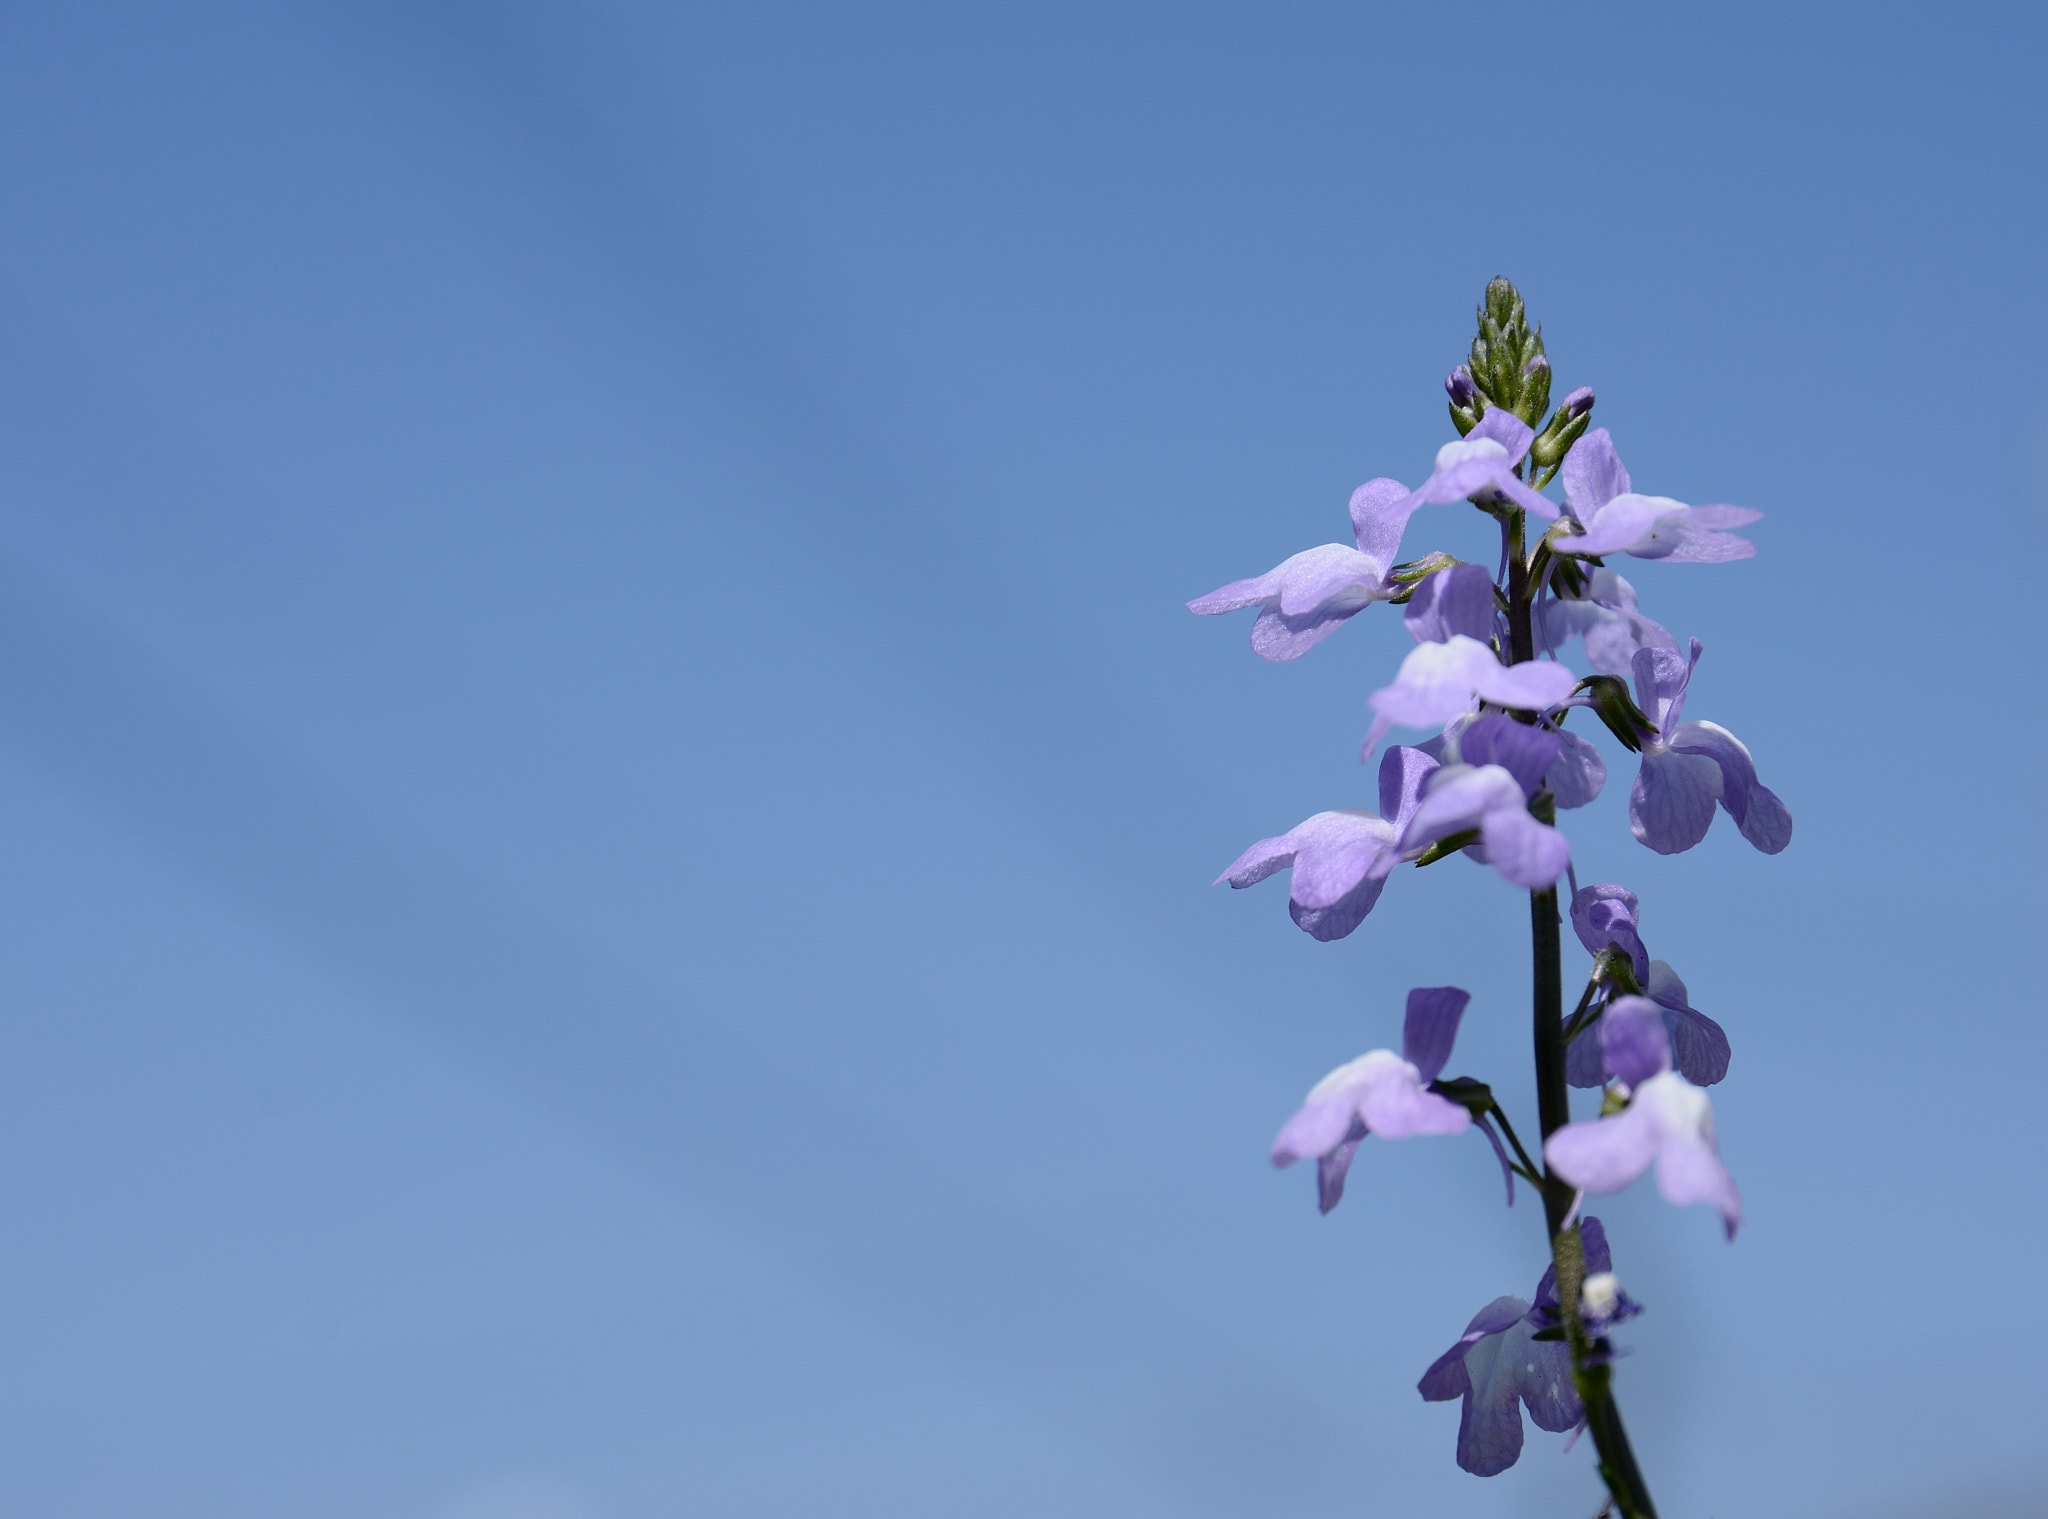 Nikon D7100 + Sigma 17-70mm F2.8-4 DC Macro OS HSM | C sample photo. The blue sky and flower photography